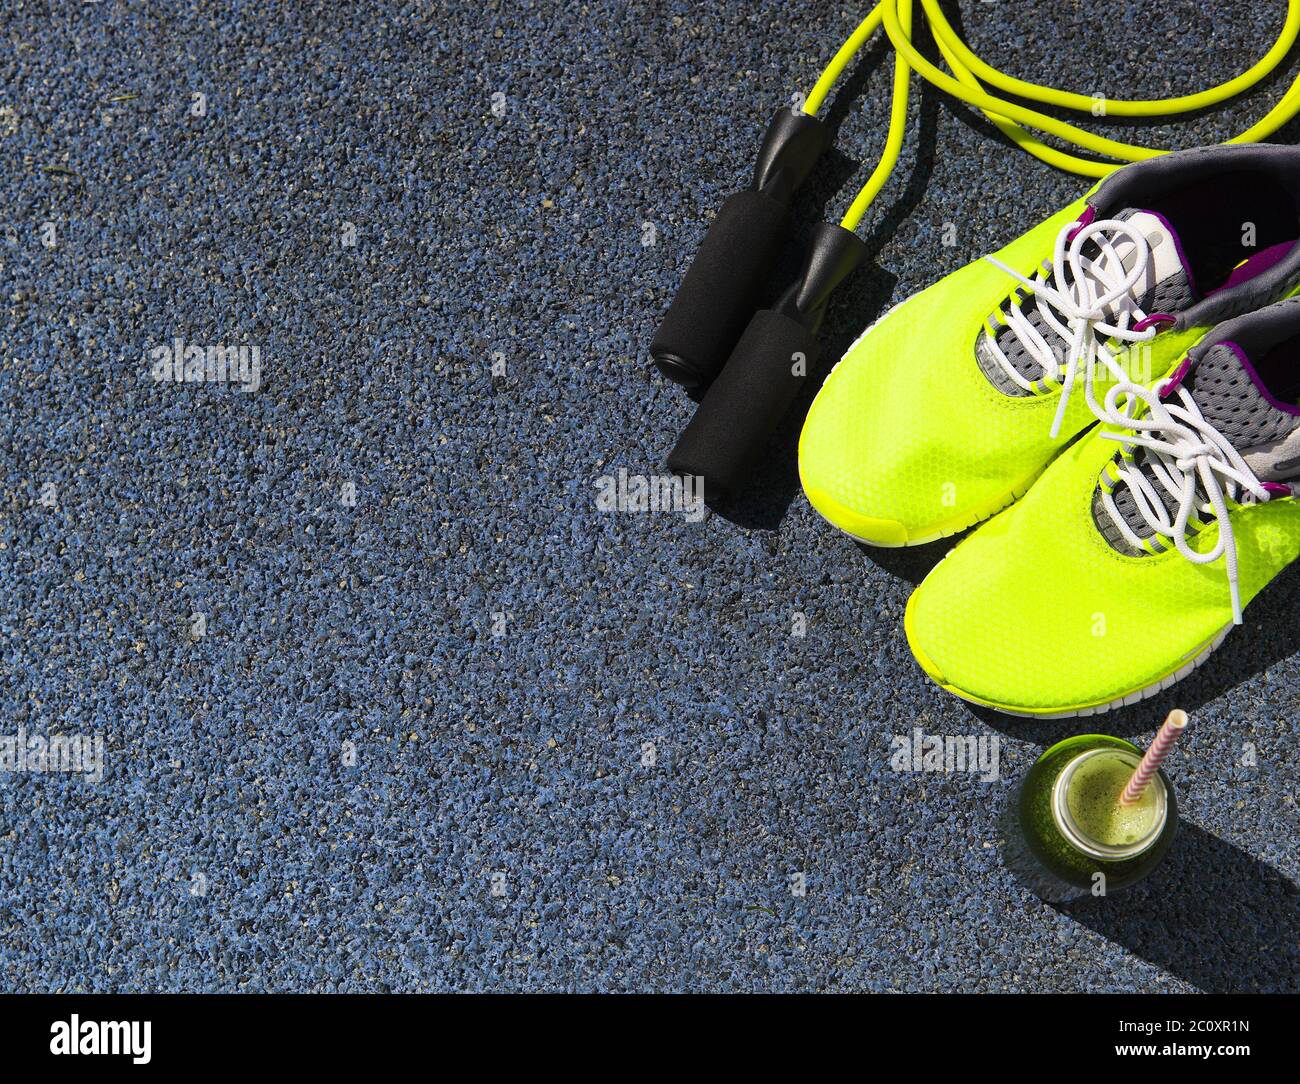 https://c8.alamy.com/comp/2C0XR1N/running-shoes-jump-rope-and-drink-bottle-with-green-juice-2C0XR1N.jpg